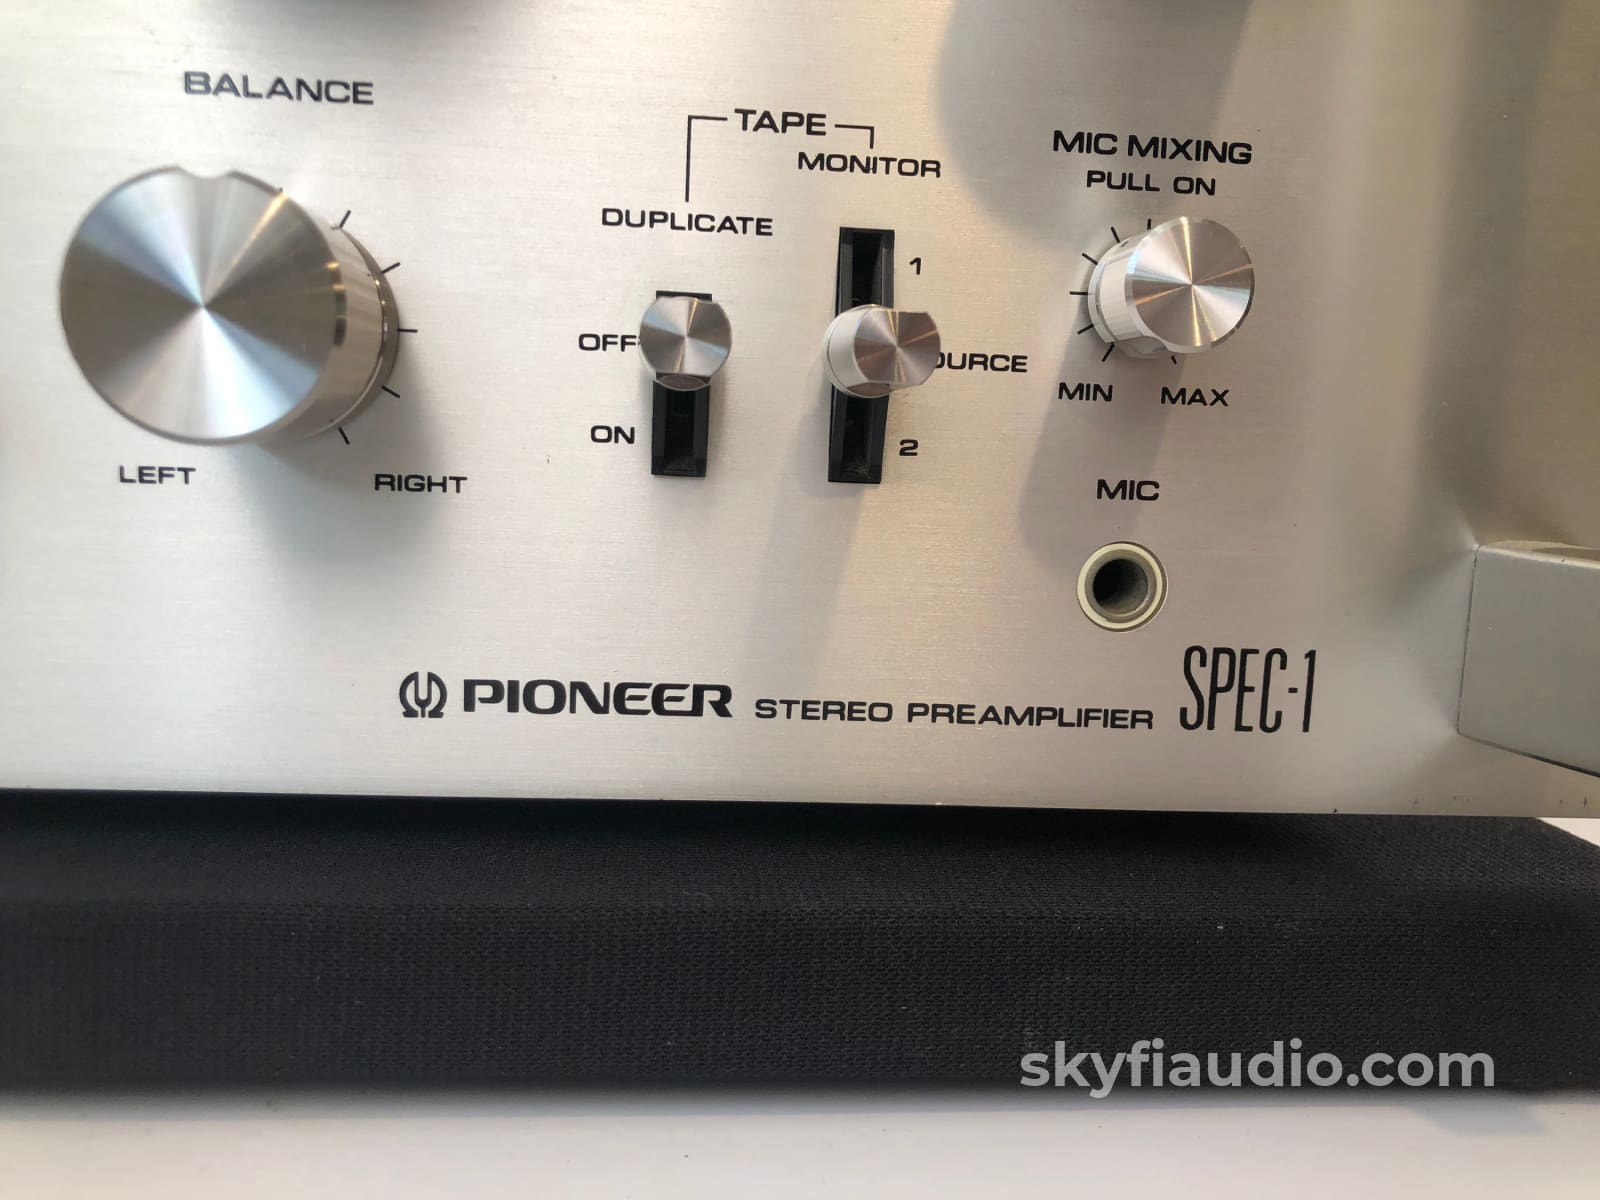 Pioneer Spec-1 Vintage Solid State Stereo Preamp With Phono - 110V/220V Version (A) Preamplifier